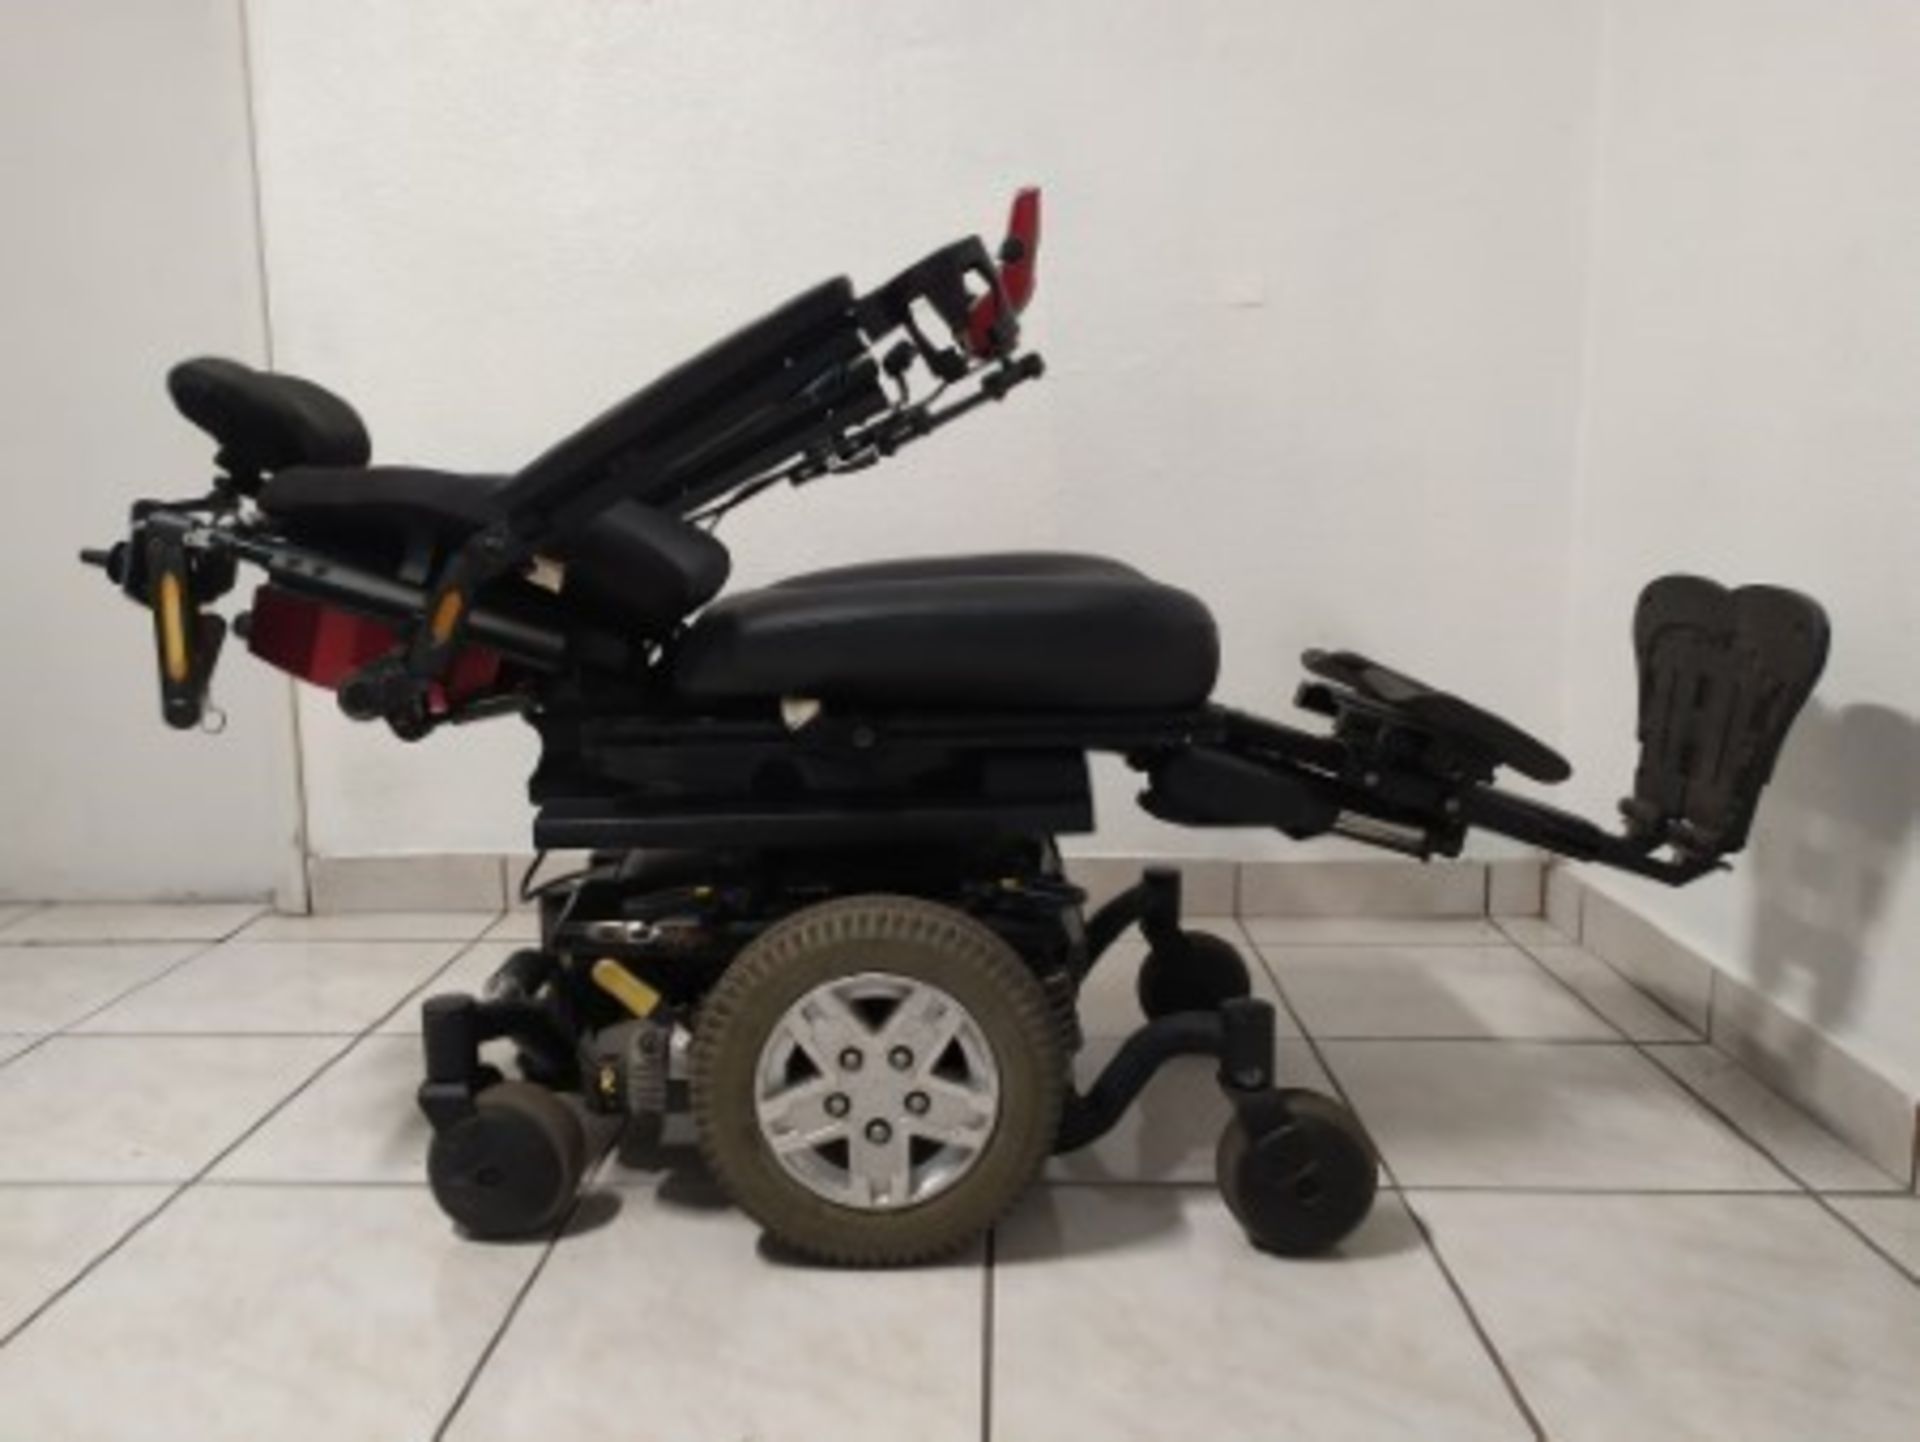 2015 QUANTUM Q6 EDGE 6-WHEEL REHAB POWER CHAIR WITH JOYSTICK CONTROL, KEYBOARD, RECLINING SEAT WITH - Image 8 of 9